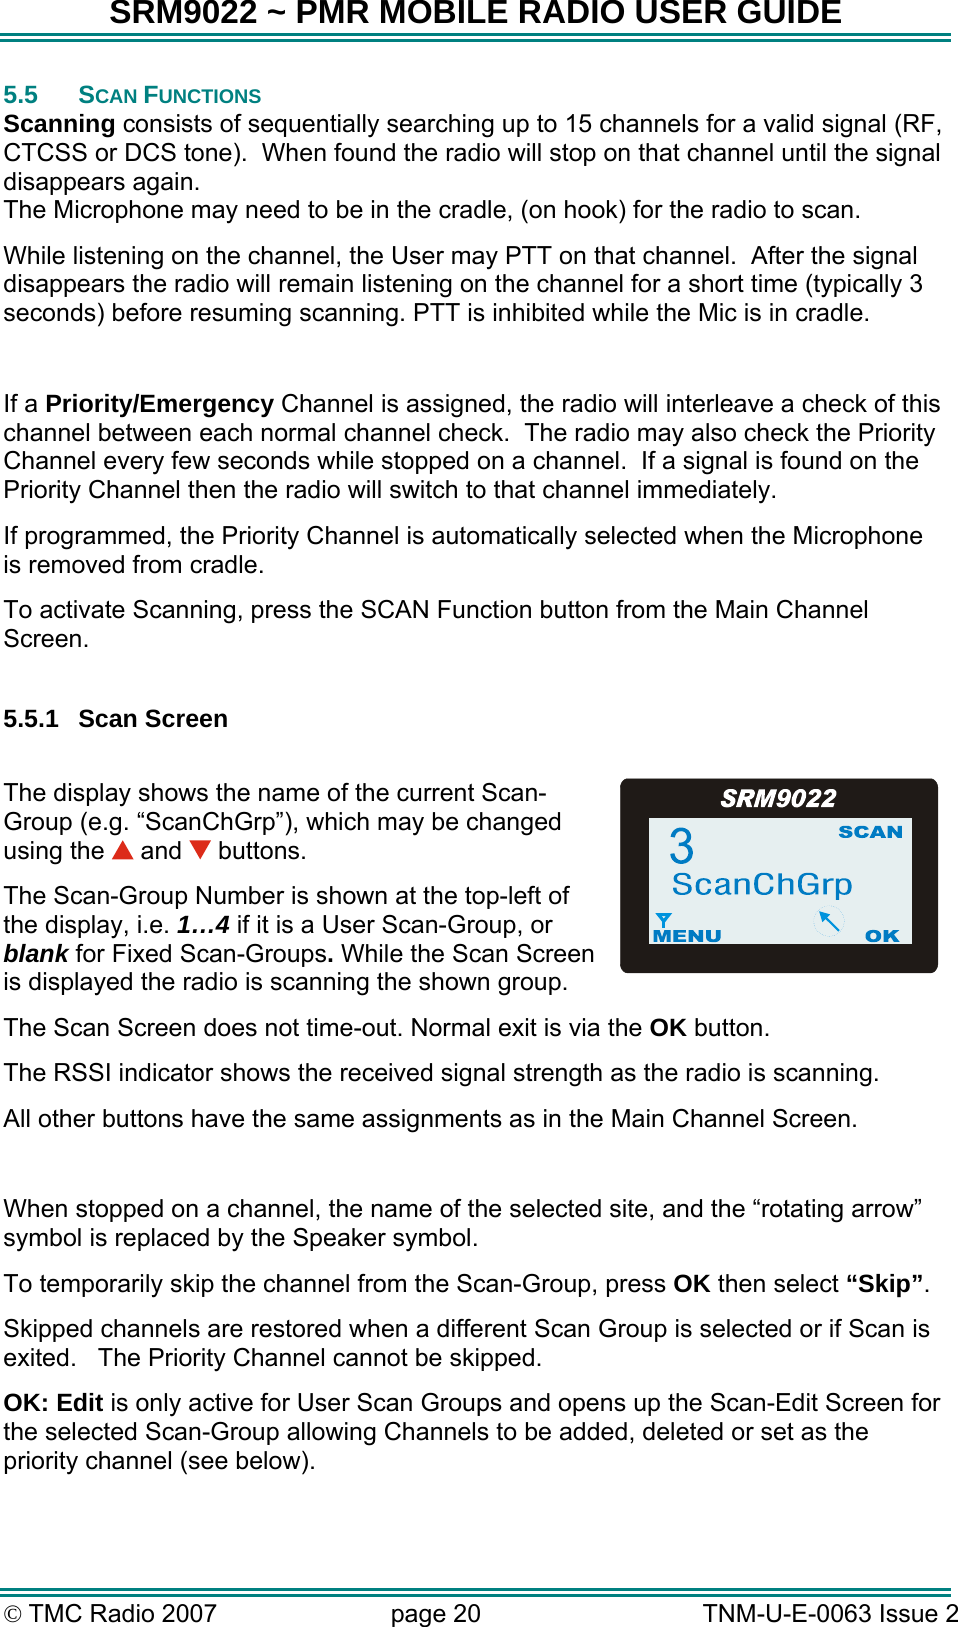 SRM9022 ~ PMR MOBILE RADIO USER GUIDE © TMC Radio 2007  page 20   TNM-U-E-0063 Issue 2 5.5 SCAN FUNCTIONS Scanning consists of sequentially searching up to 15 channels for a valid signal (RF, CTCSS or DCS tone).  When found the radio will stop on that channel until the signal disappears again.   The Microphone may need to be in the cradle, (on hook) for the radio to scan.   While listening on the channel, the User may PTT on that channel.  After the signal disappears the radio will remain listening on the channel for a short time (typically 3 seconds) before resuming scanning. PTT is inhibited while the Mic is in cradle.  If a Priority/Emergency Channel is assigned, the radio will interleave a check of this channel between each normal channel check.  The radio may also check the Priority Channel every few seconds while stopped on a channel.  If a signal is found on the Priority Channel then the radio will switch to that channel immediately.   If programmed, the Priority Channel is automatically selected when the Microphone is removed from cradle. To activate Scanning, press the SCAN Function button from the Main Channel Screen.  5.5.1 Scan Screen  The display shows the name of the current Scan-Group (e.g. “ScanChGrp”), which may be changed using the   and   buttons.  The Scan-Group Number is shown at the top-left of the display, i.e. 1…4 if it is a User Scan-Group, or blank for Fixed Scan-Groups. While the Scan Screen is displayed the radio is scanning the shown group. The Scan Screen does not time-out. Normal exit is via the OK button. The RSSI indicator shows the received signal strength as the radio is scanning. All other buttons have the same assignments as in the Main Channel Screen.    When stopped on a channel, the name of the selected site, and the “rotating arrow” symbol is replaced by the Speaker symbol. To temporarily skip the channel from the Scan-Group, press OK then select “Skip”.  Skipped channels are restored when a different Scan Group is selected or if Scan is exited.   The Priority Channel cannot be skipped.   OK: Edit is only active for User Scan Groups and opens up the Scan-Edit Screen for the selected Scan-Group allowing Channels to be added, deleted or set as the priority channel (see below). 